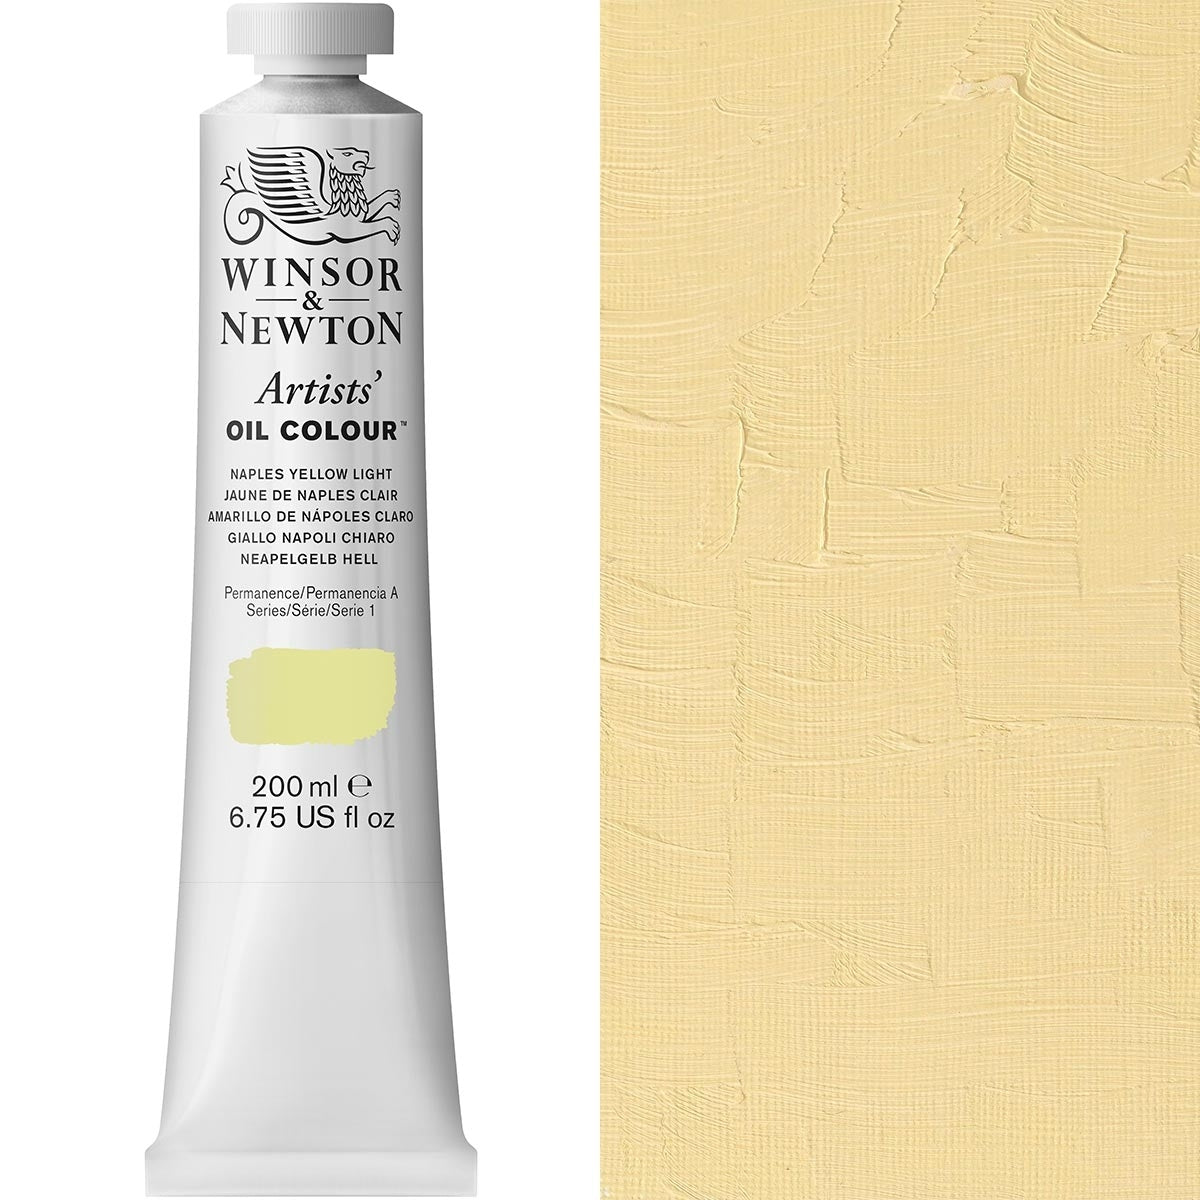 Winsor and Newton - Artists' Oil Colour - 200ml - Naples Yellow Light